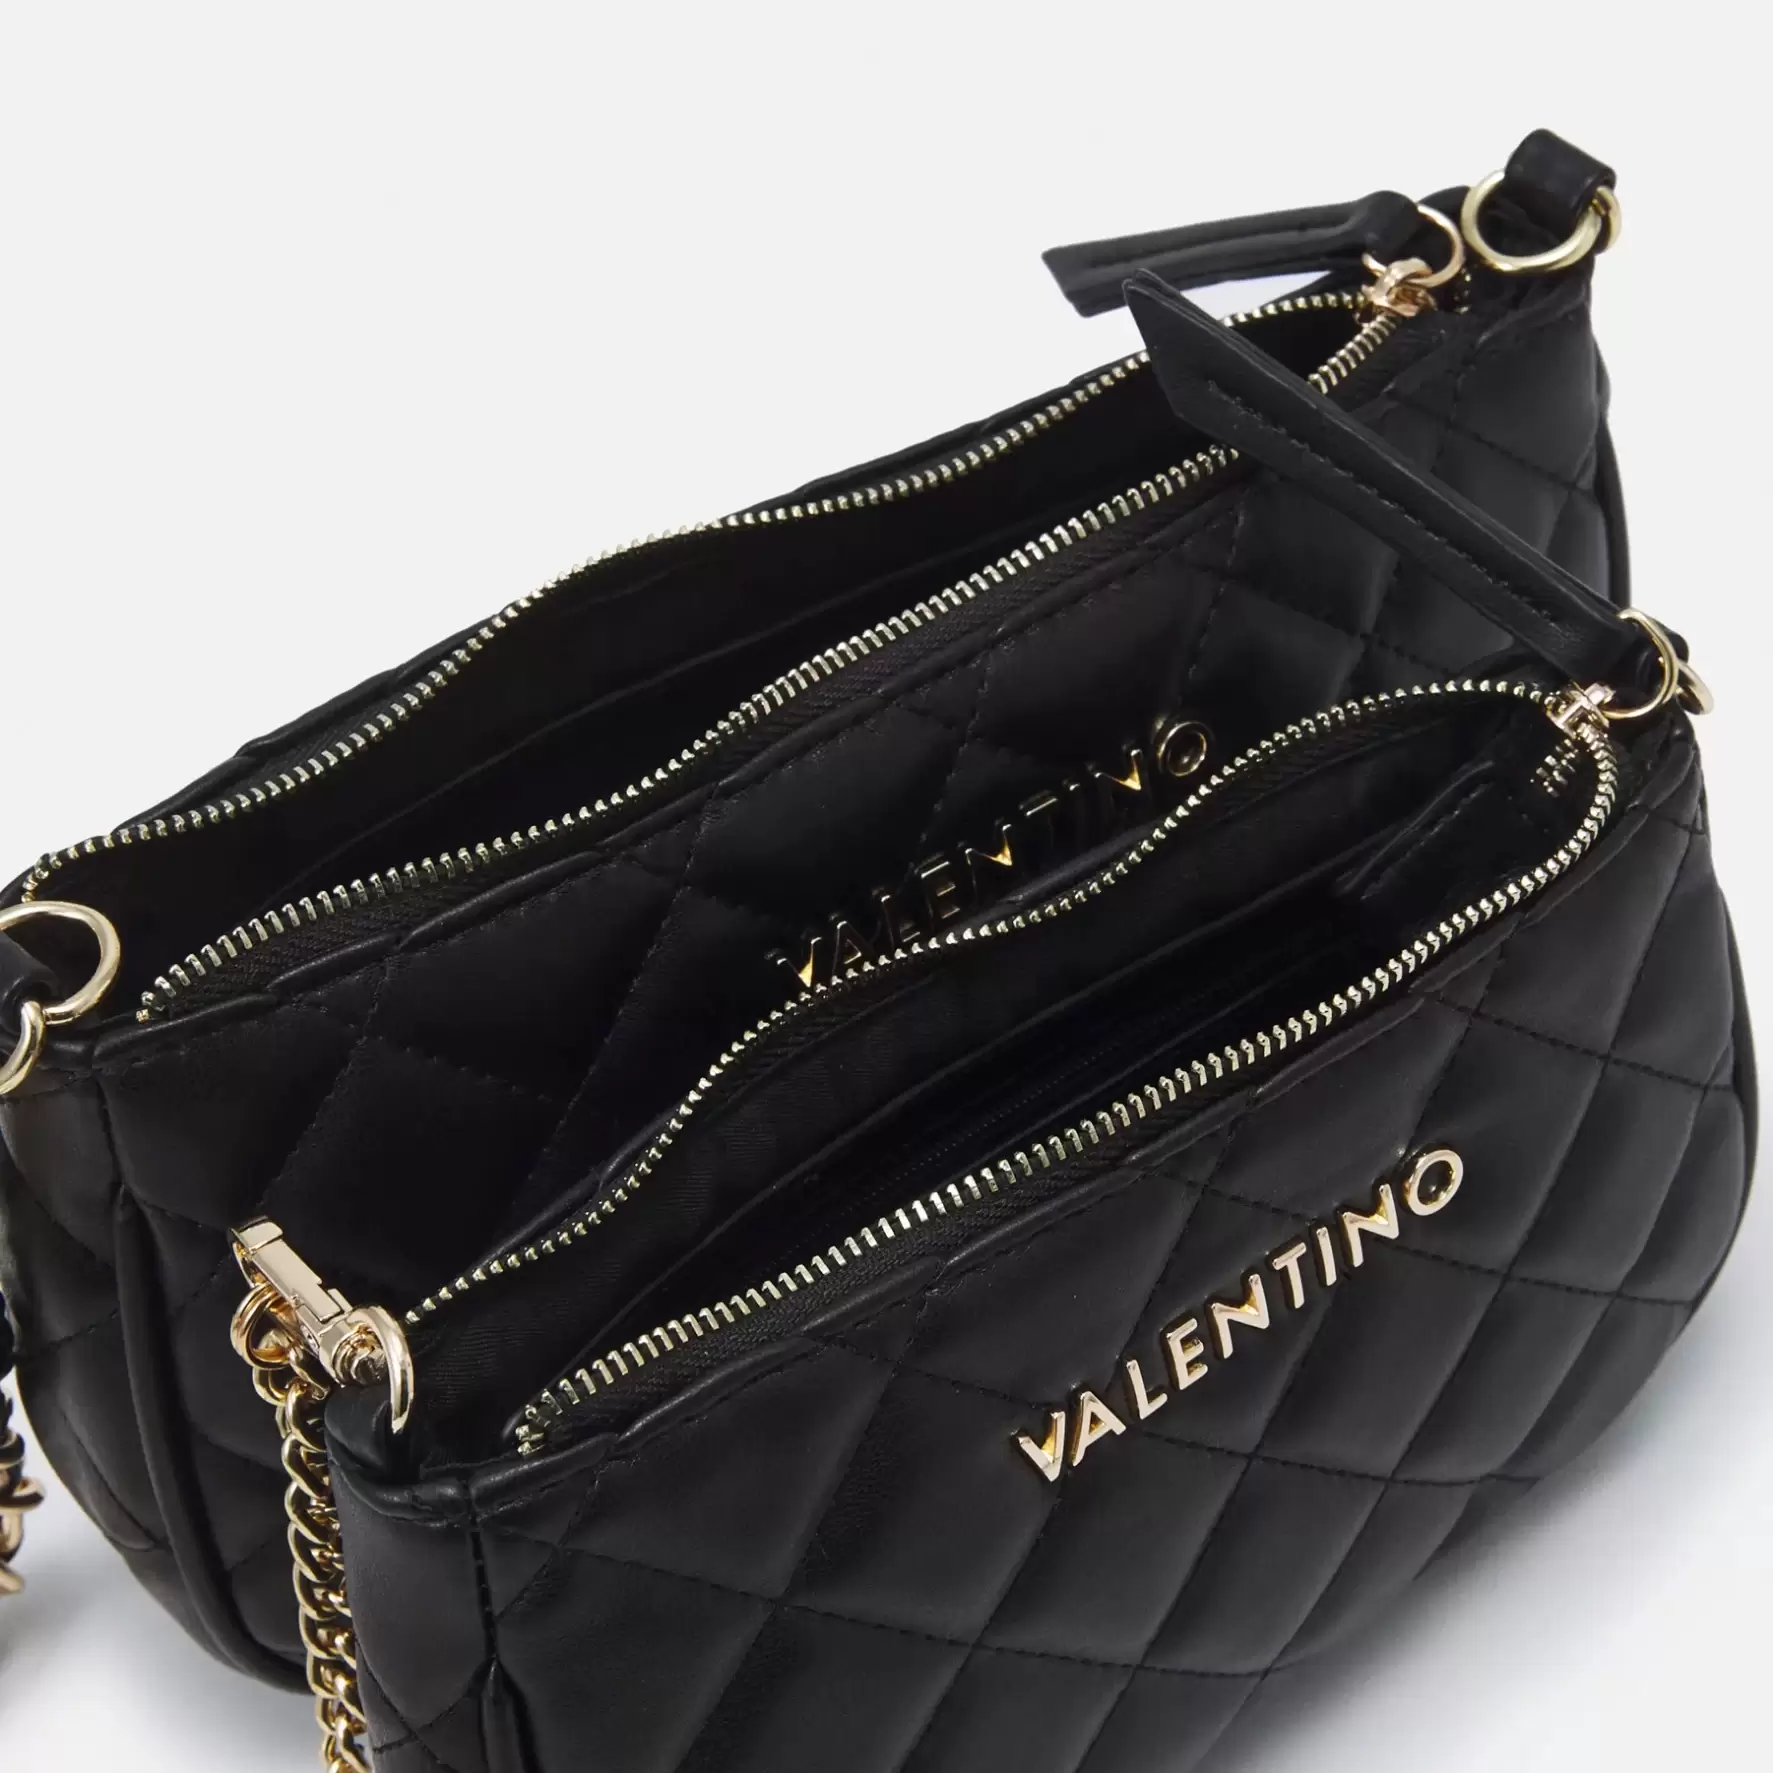 Valentino Bags Ocarina Quilted Cross-Body Bag